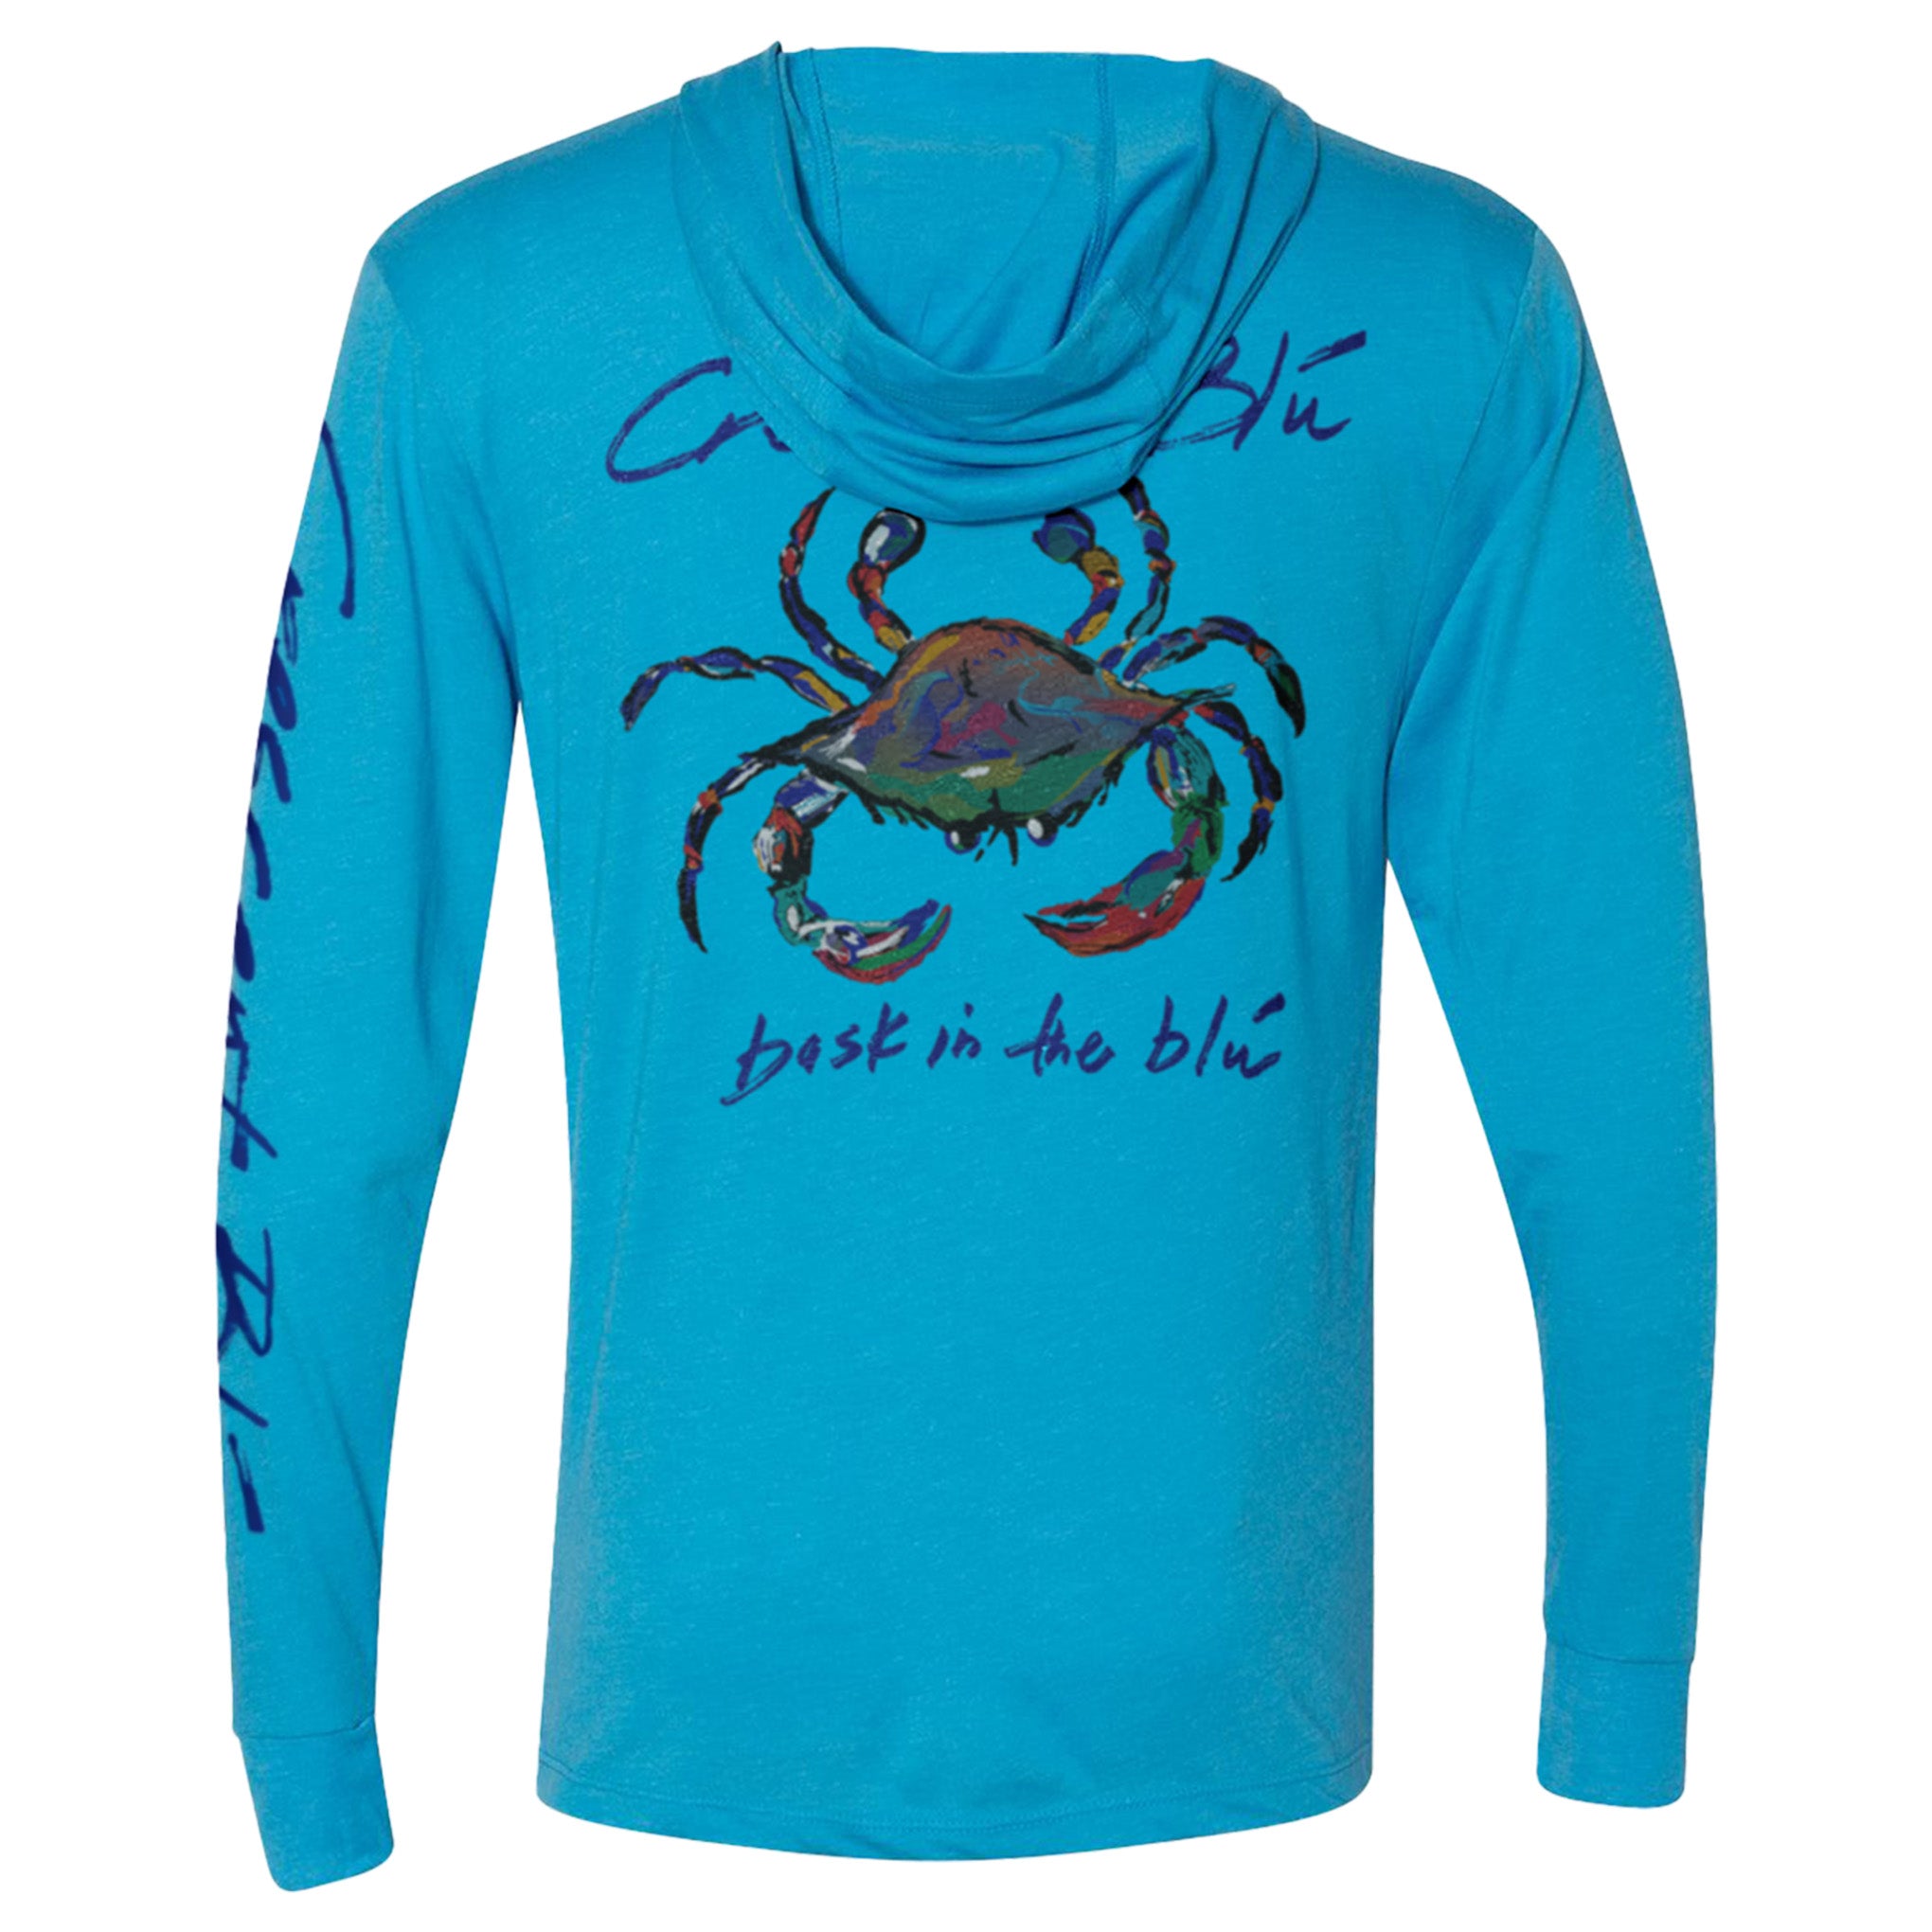 View of back of long sleeve hoodie tee in vintage turquoise color with large multi-colored crab printed on the back along with Bask in the Blu tagline